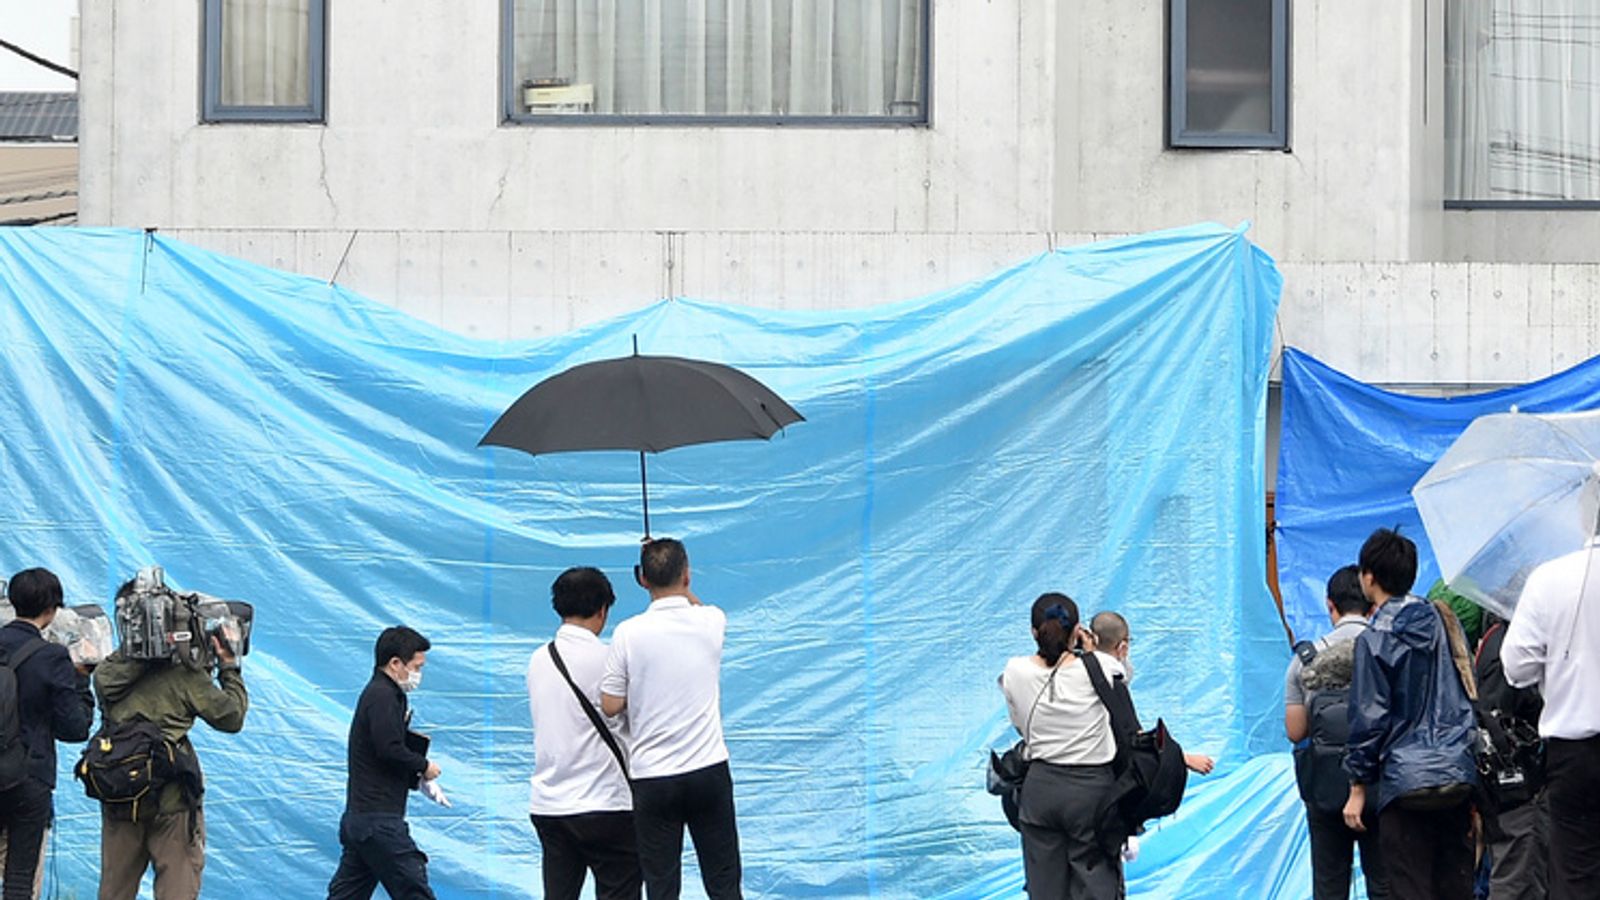 Woman and parents arrested after headless body found in bathtub at Japan 'love hotel'